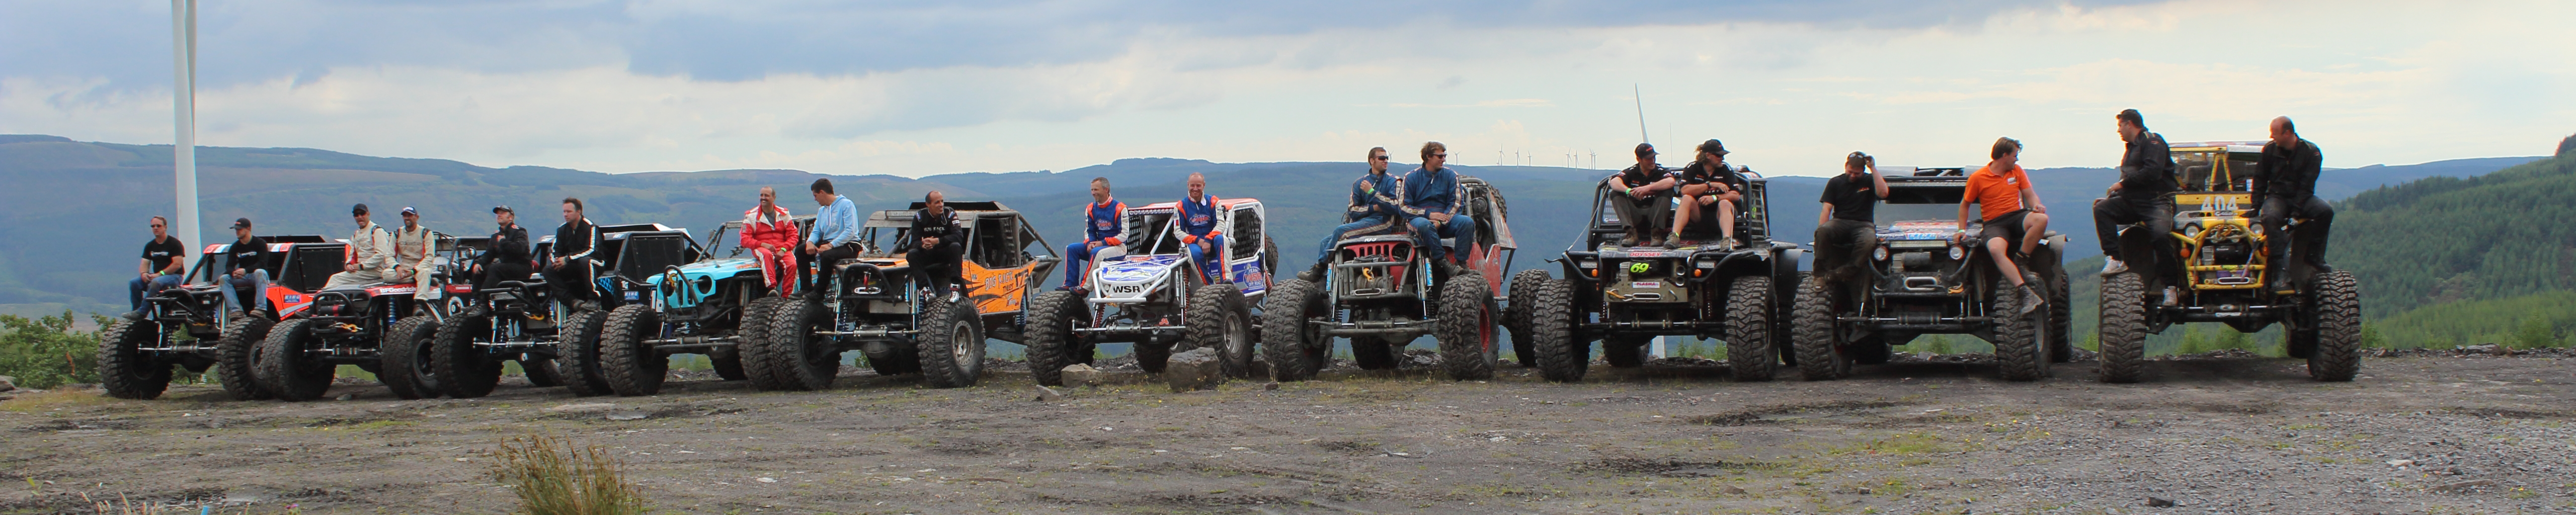 King of the Glens 2014 – Team Gigglepin report